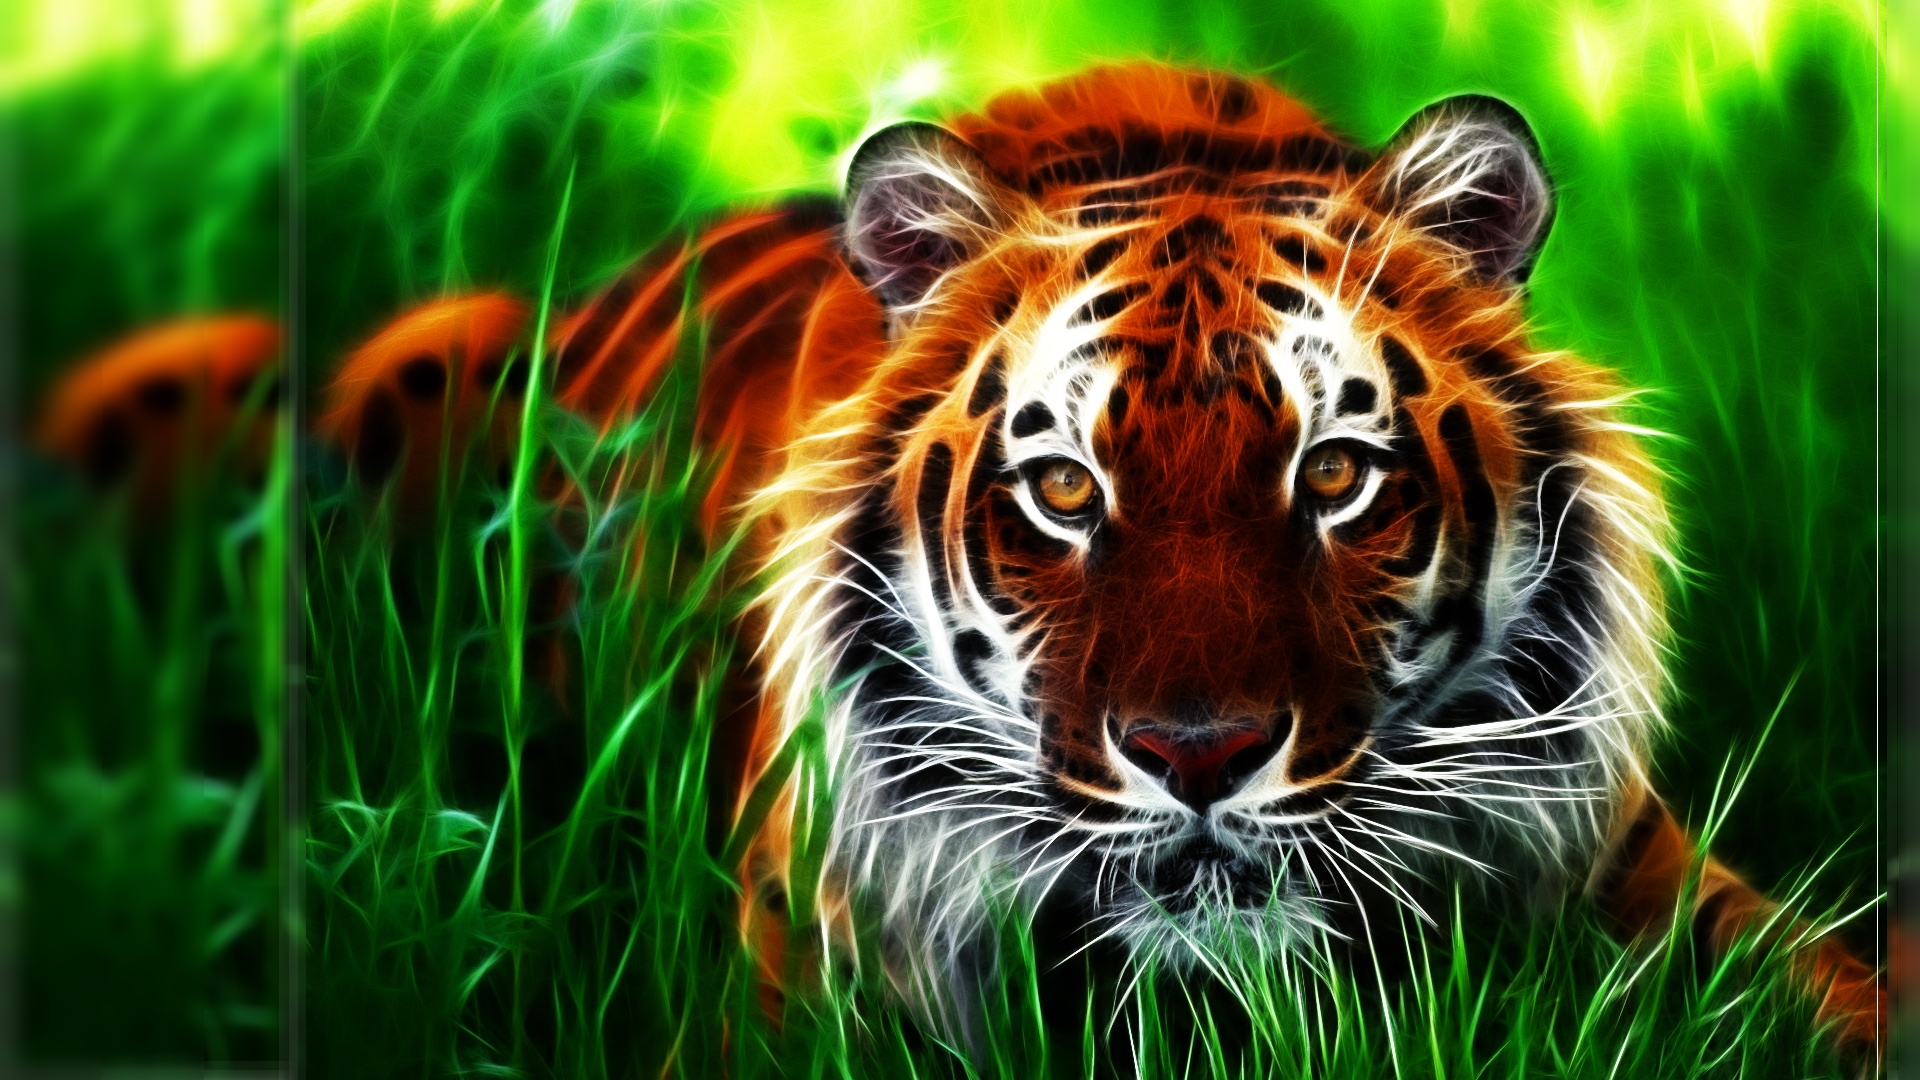 Abstract Tiger Wallpaper Green Background Pictures And Image